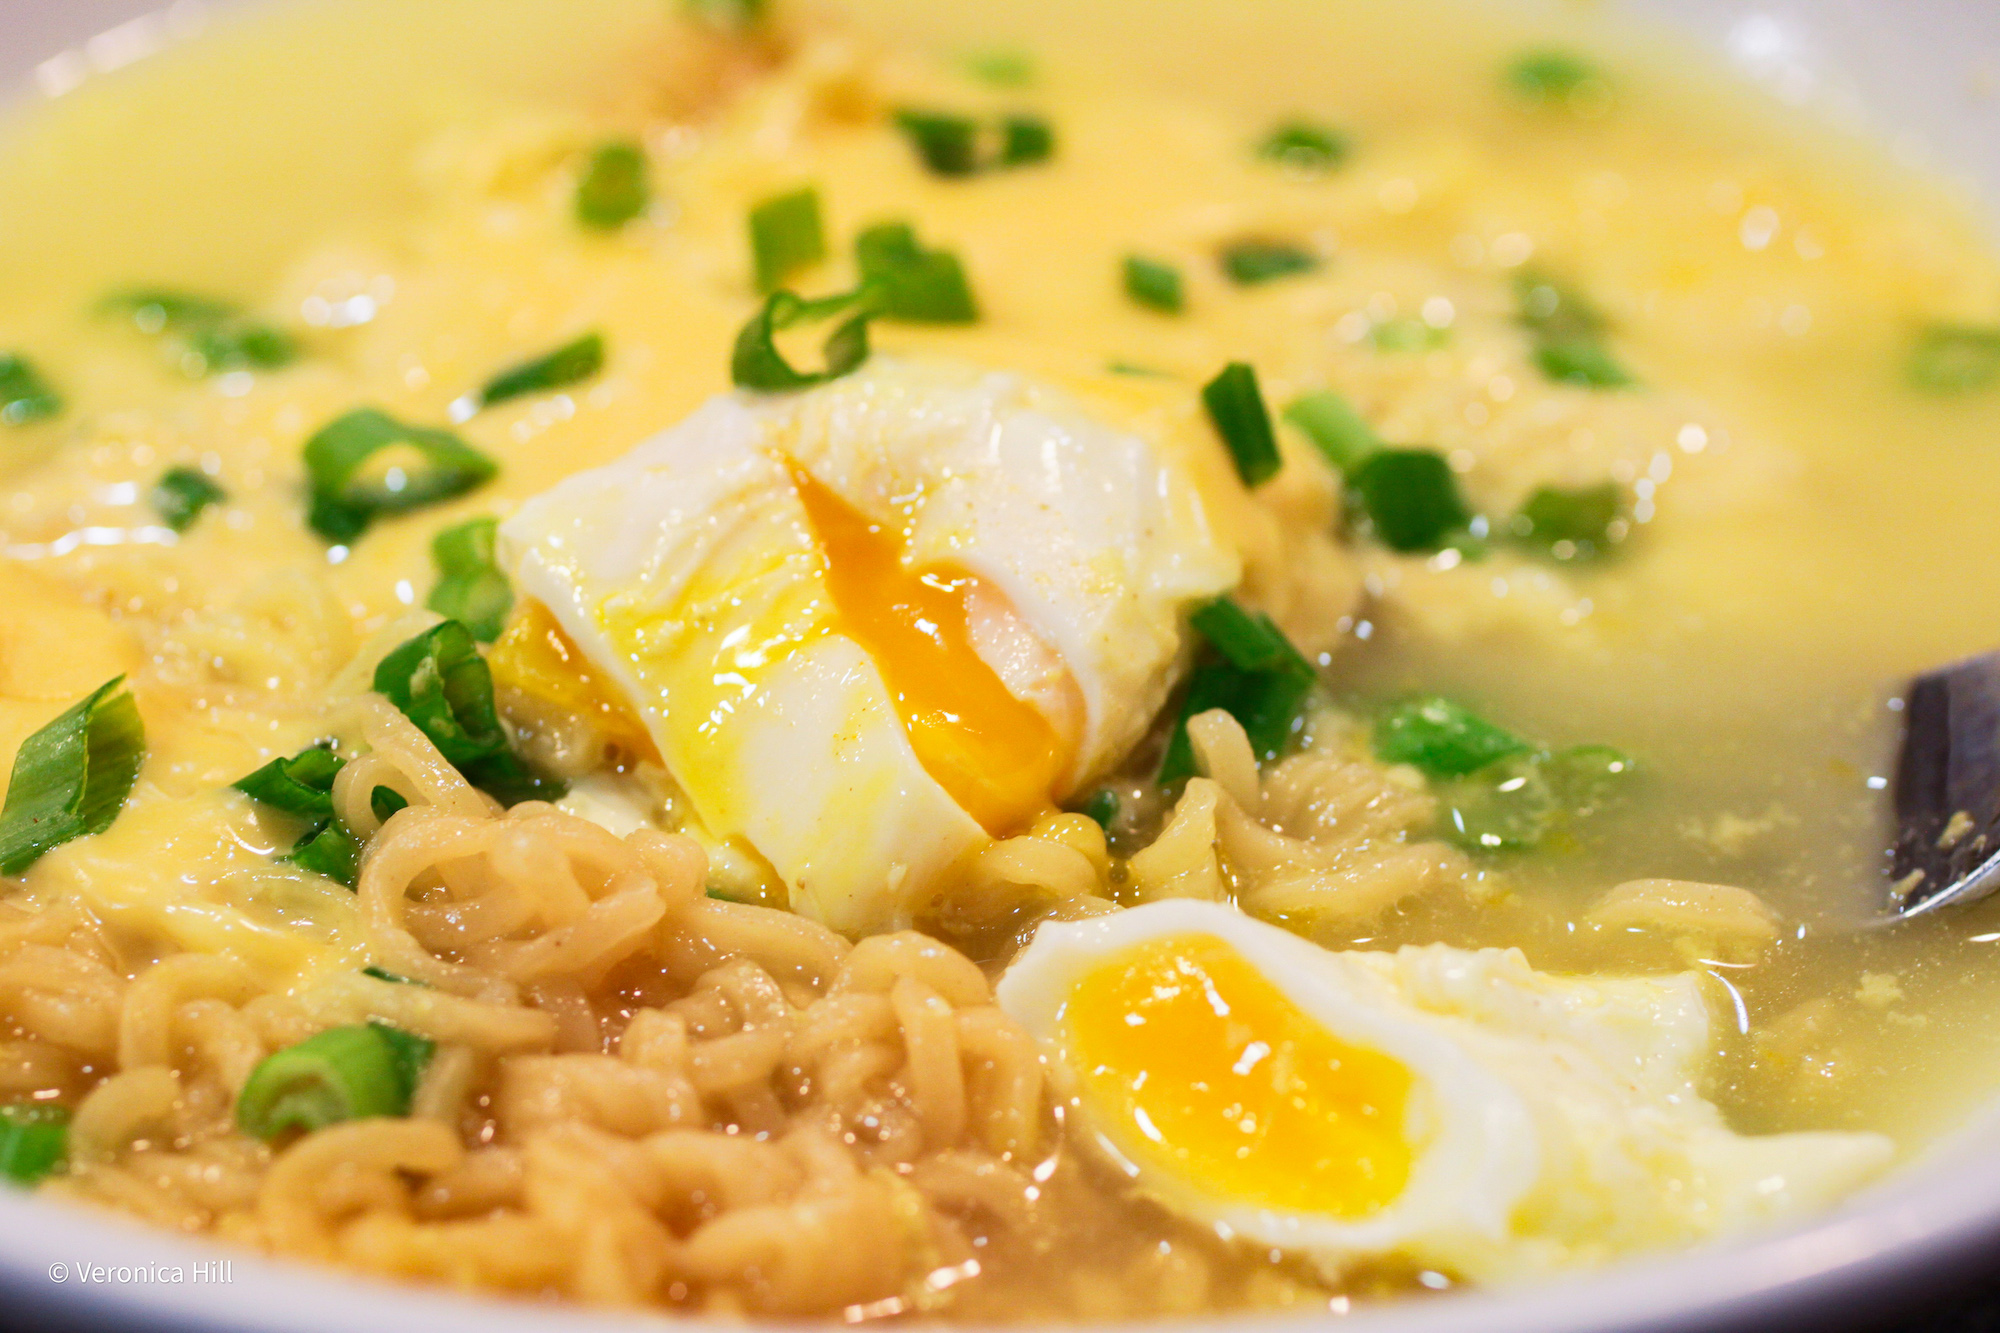 Photo of Roy Choi's ramen noodles with poached egg